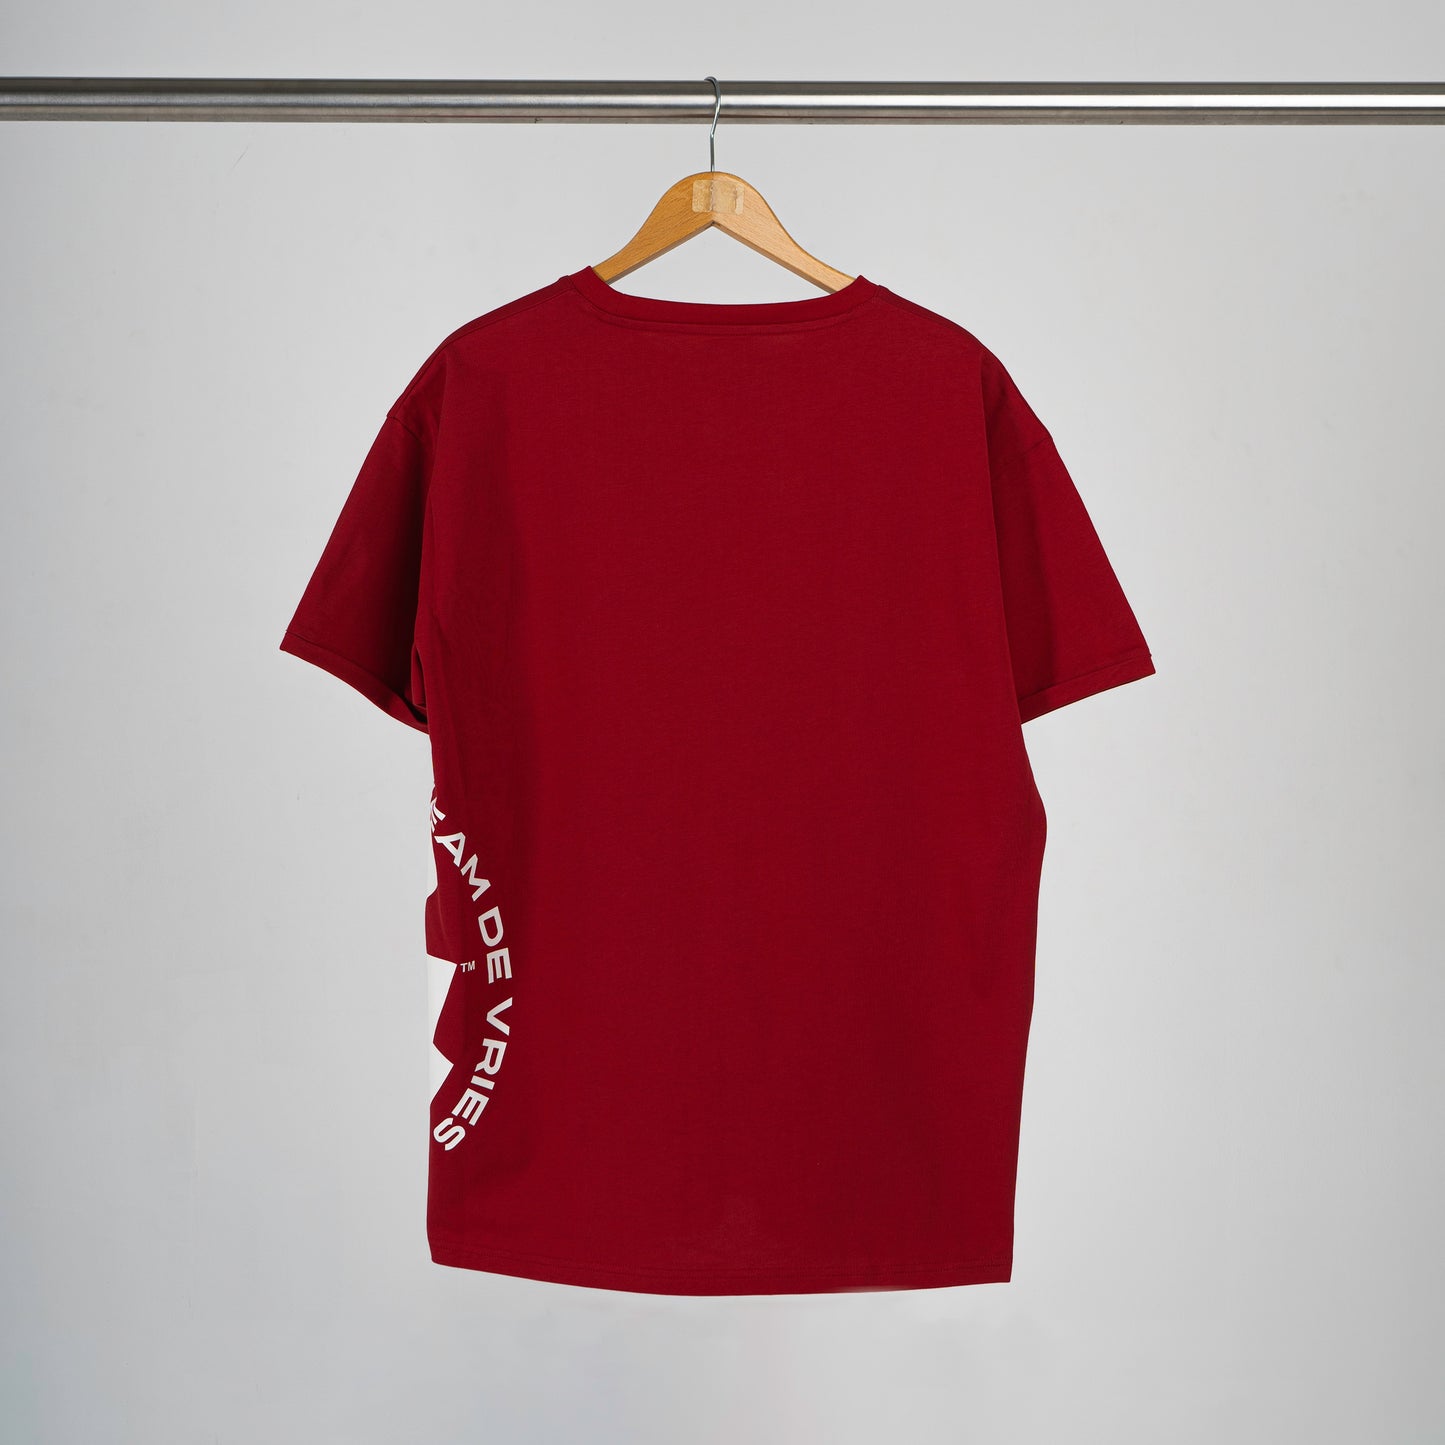 The official NYCK red t-shirt